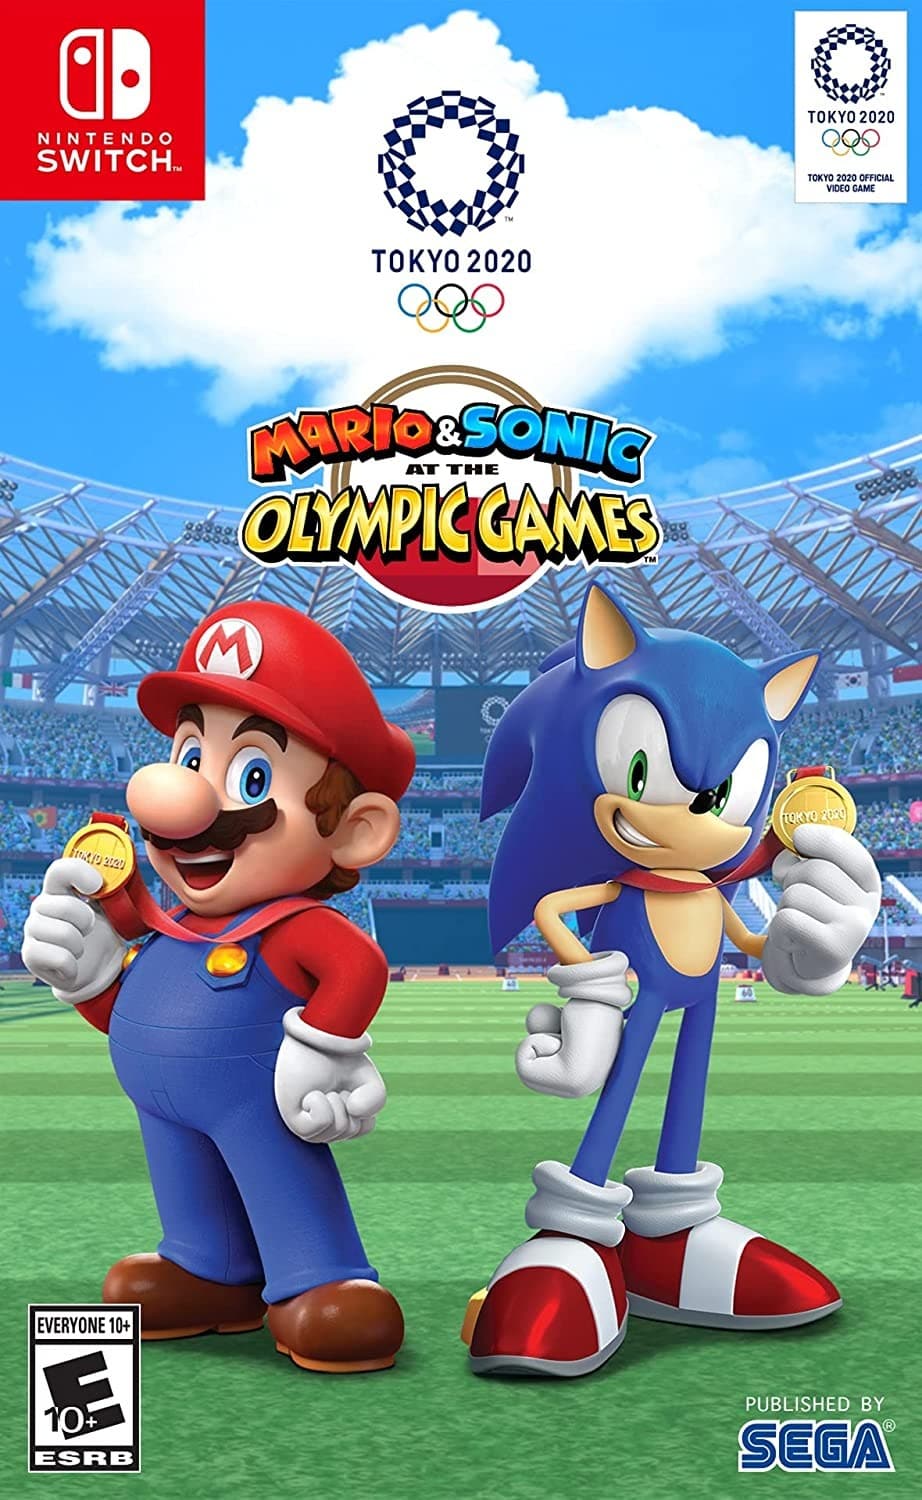 Mario & Sonic at the Olympic Games Tokyo 2020 (Standard Edition) - Nintendo Switch